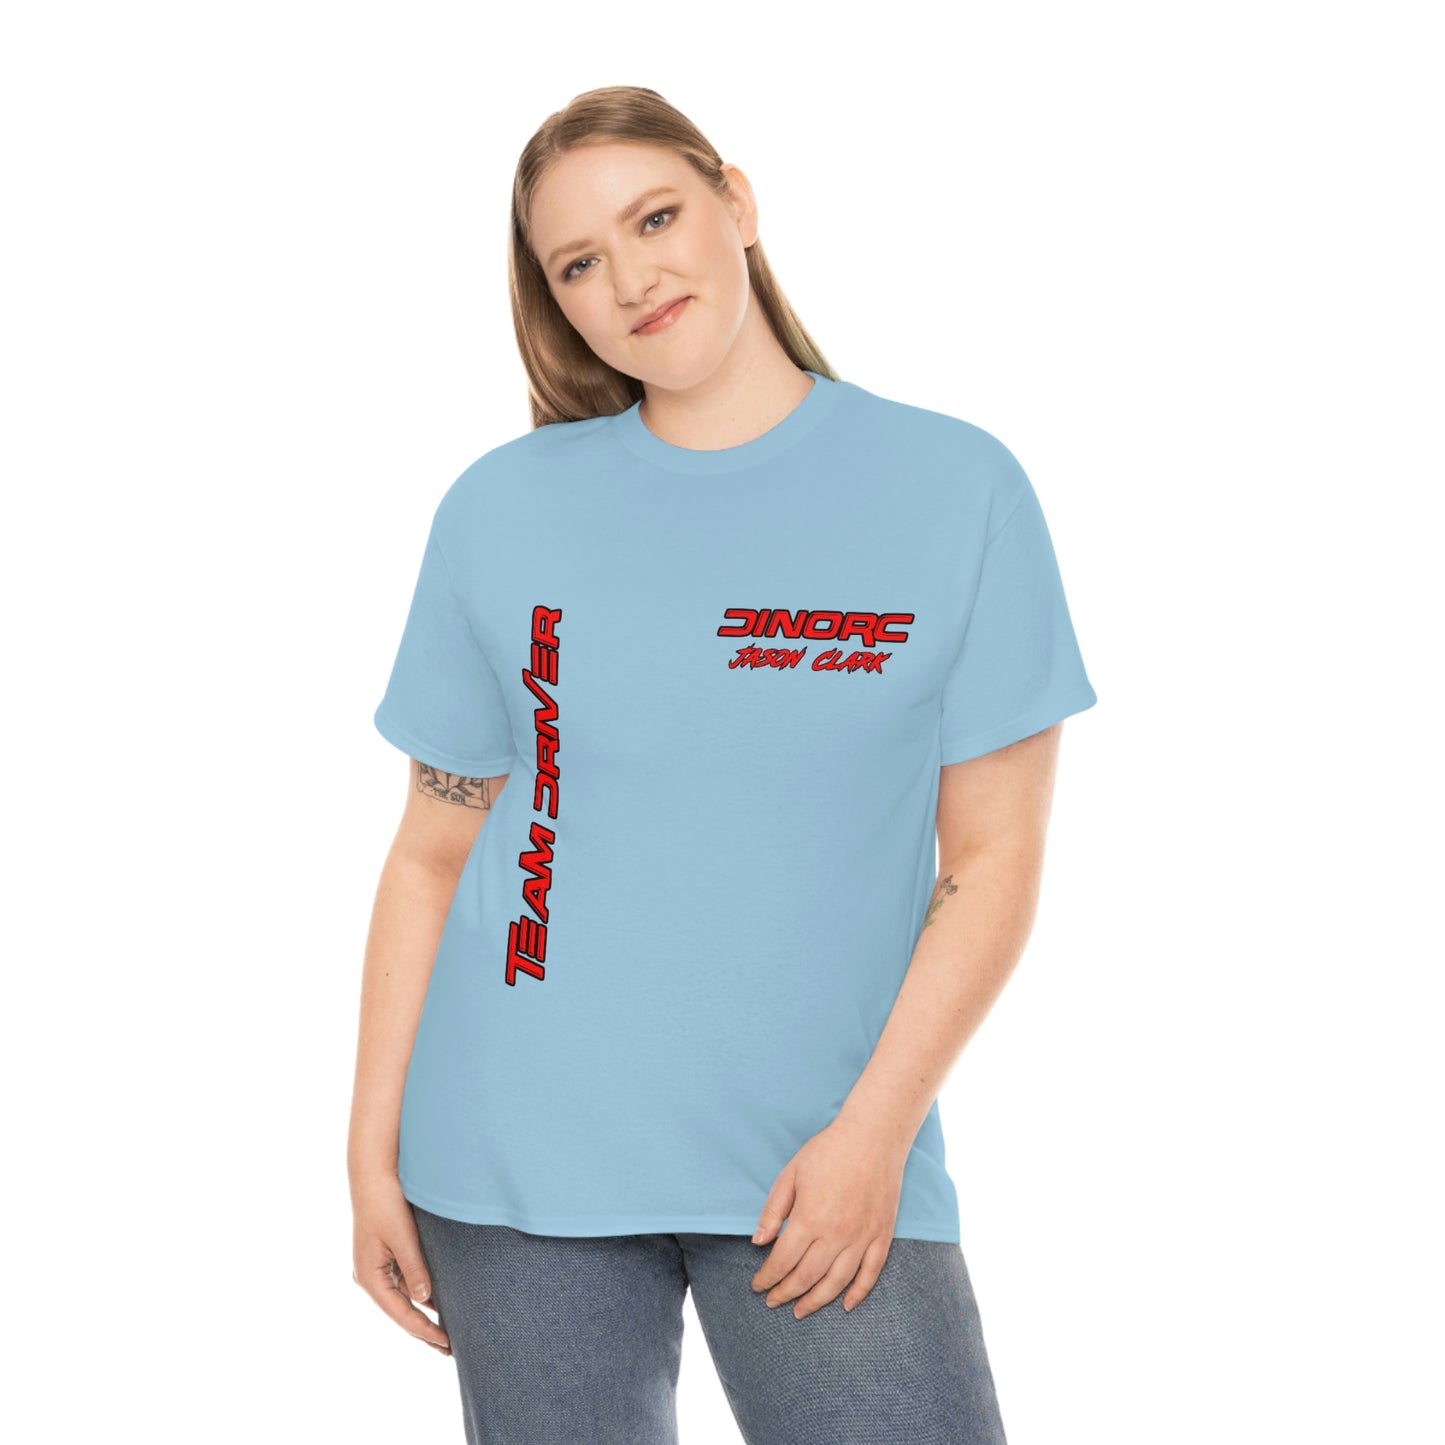 Team Driver Jason Clark Front and Back DinoRc Logo T-Shirt S-5x 5 colors